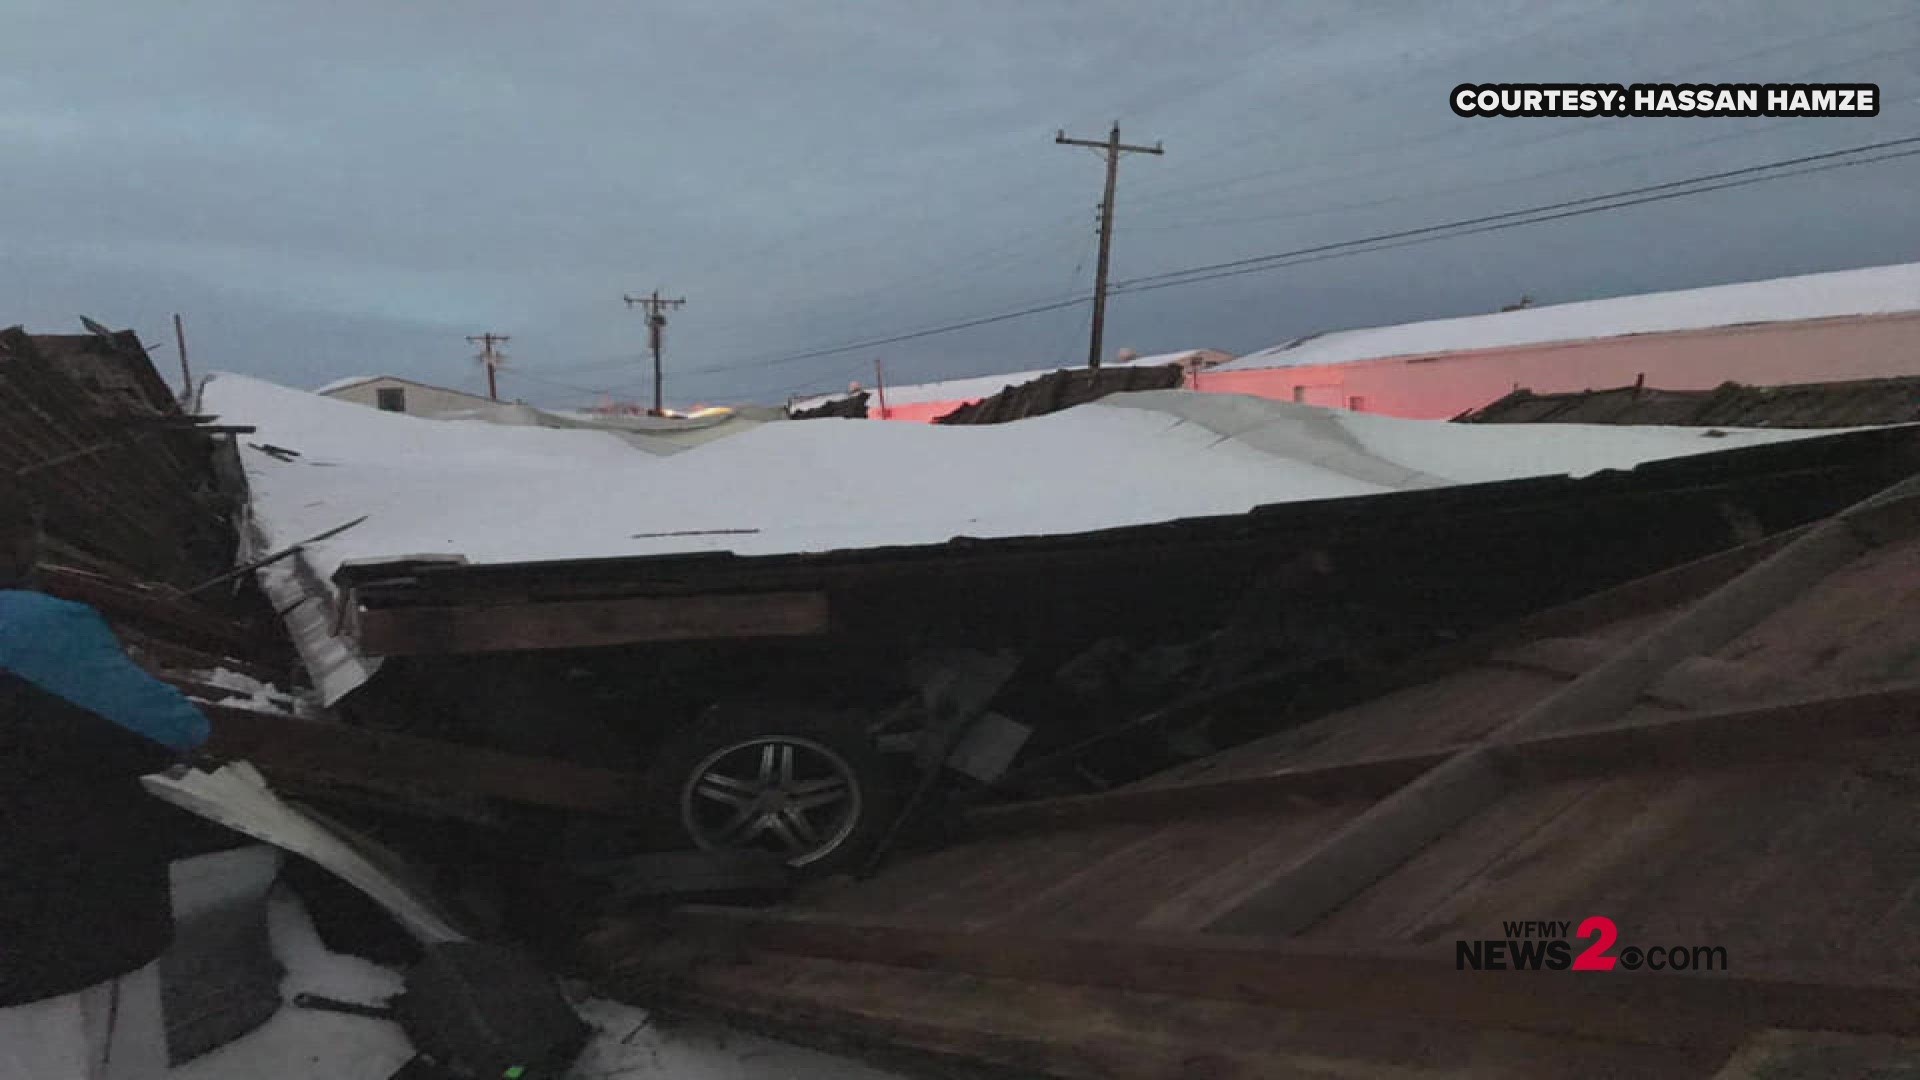 Heavy snow was just too much for a warehouse in Greensboro as it buckled and crushed the cars below.